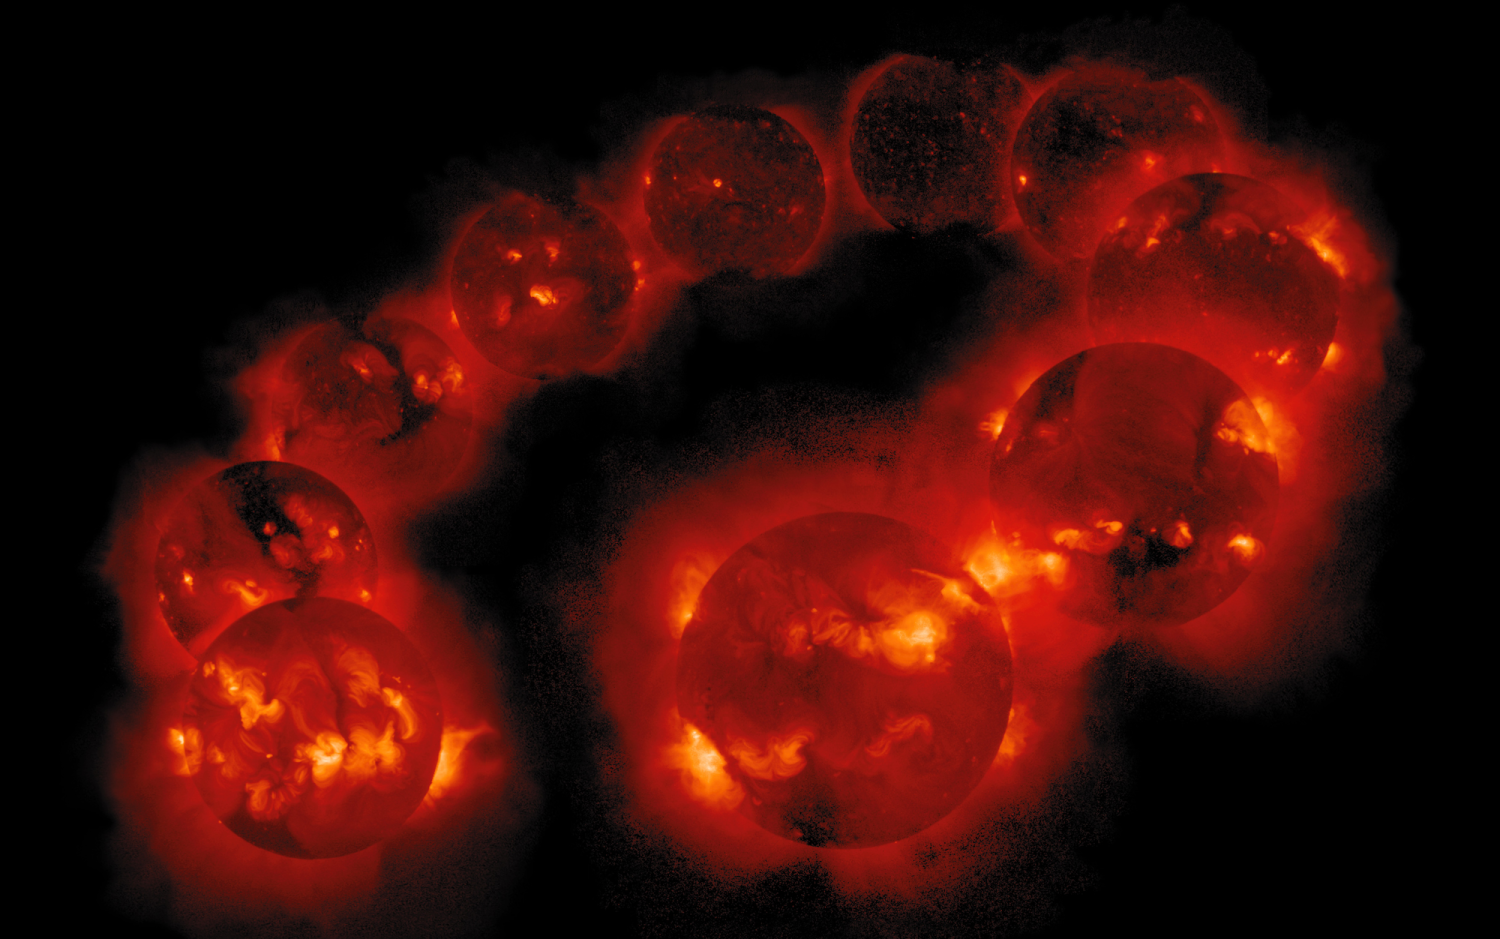 Collage of 10 images of the sun arranged in a circle. Some of the images are bright orange, while others are dimmer.